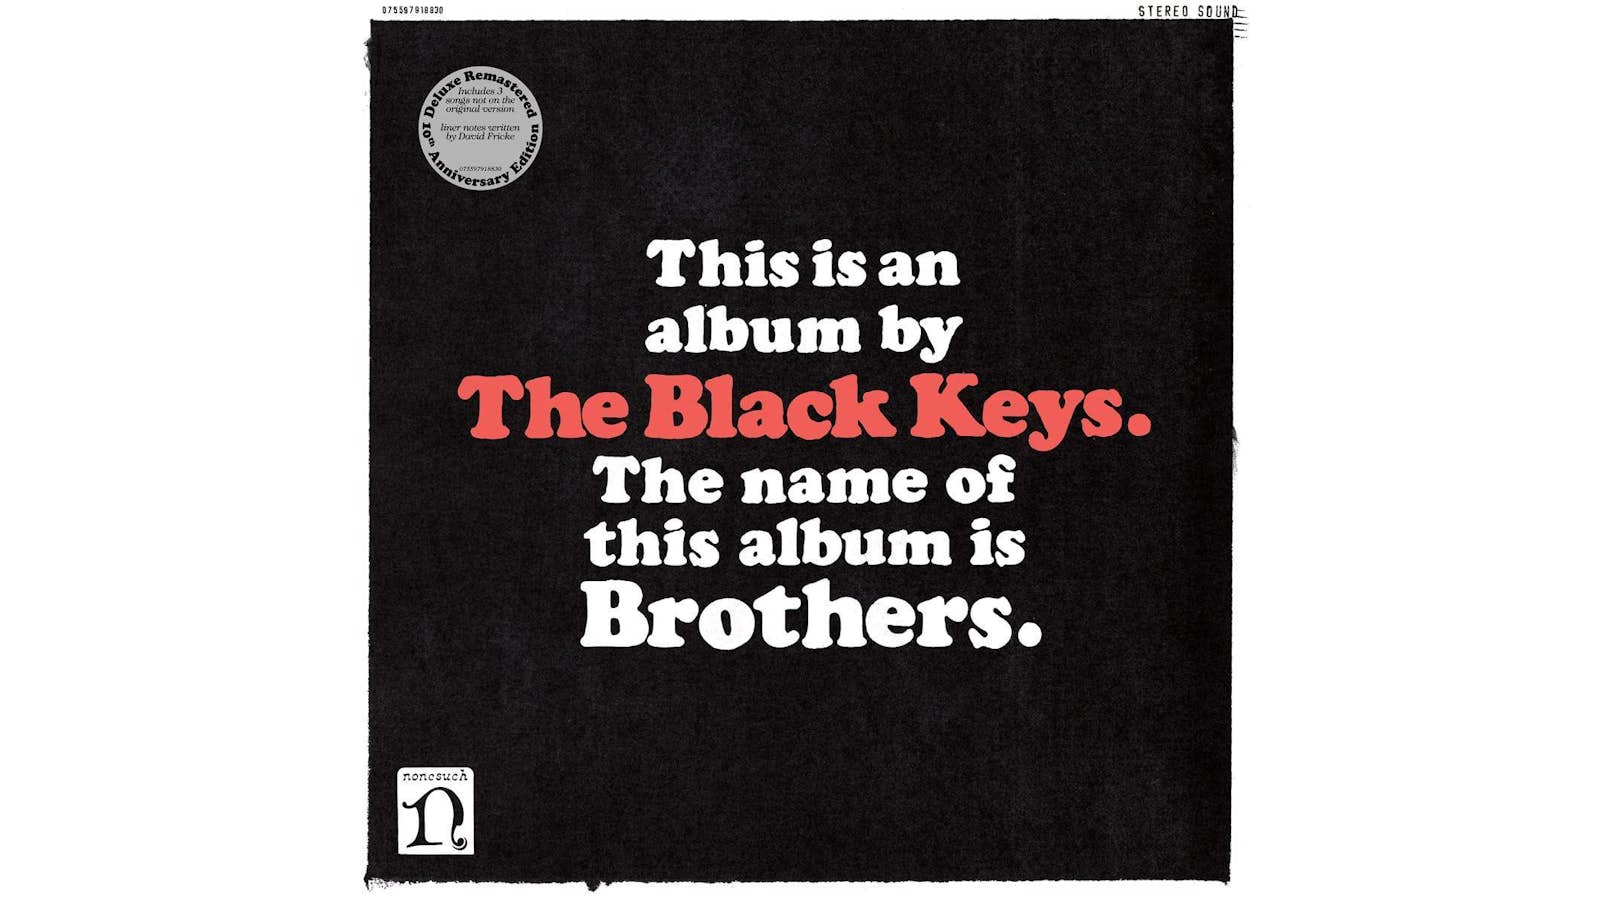 Mark Neill On The Making Of The Black Keys' 'Brothers', 49% OFF